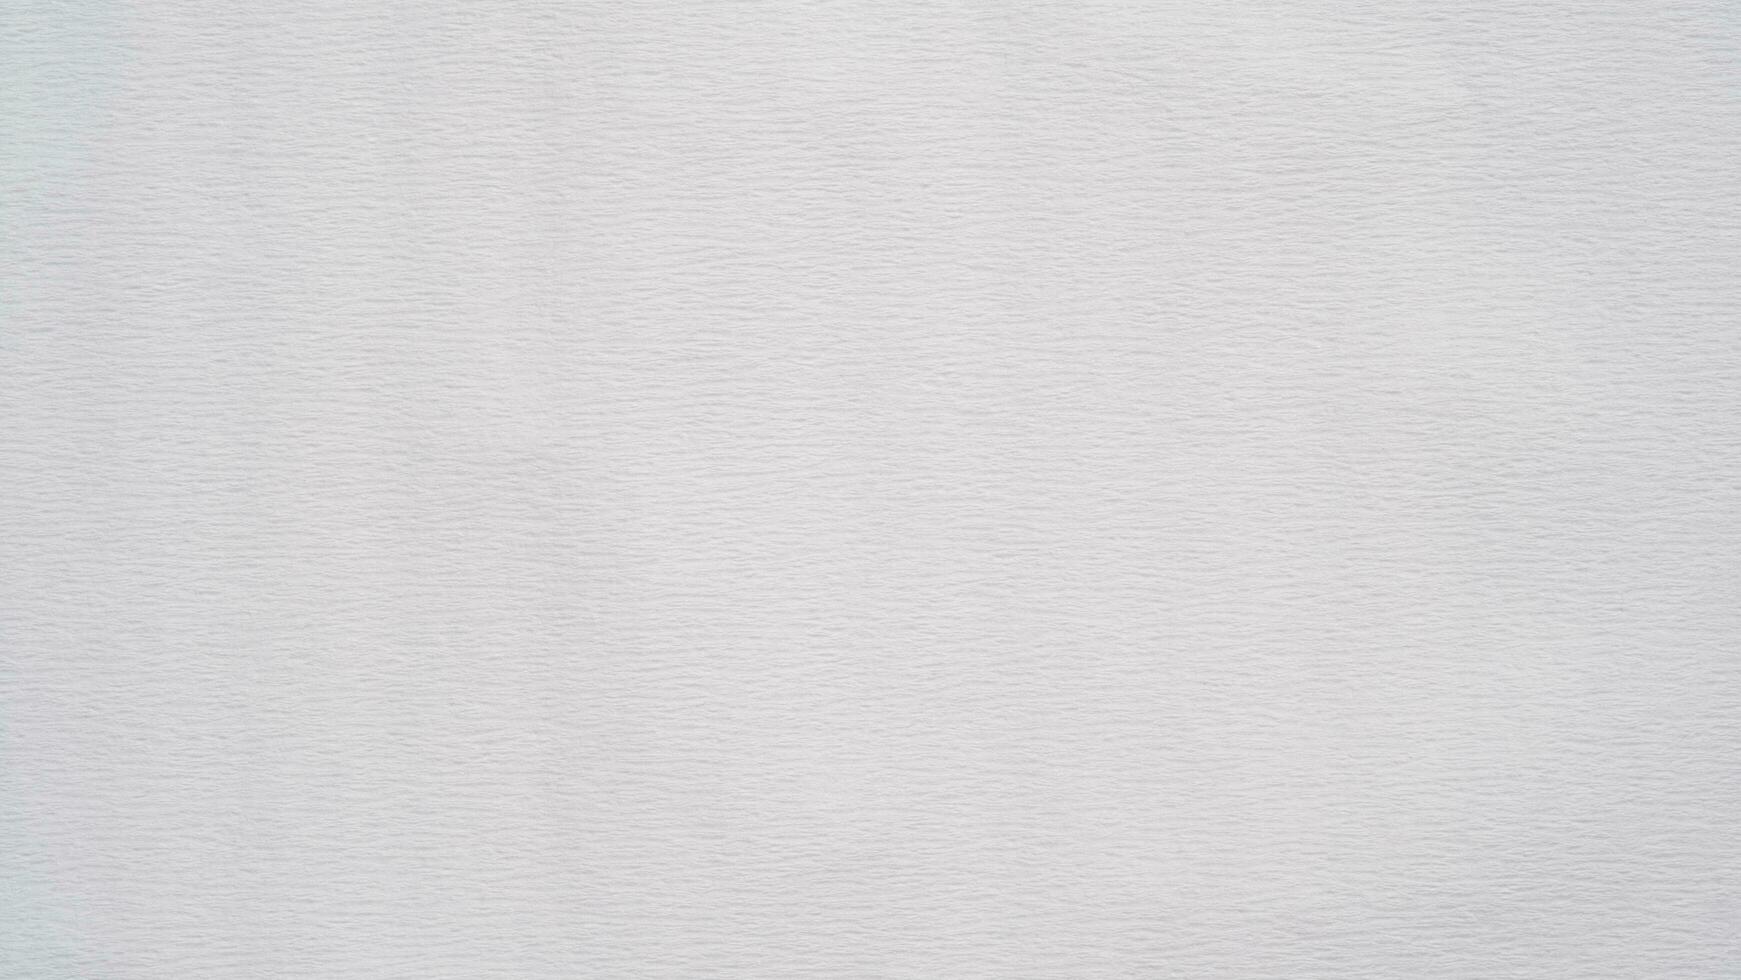 white tissue paper used to wipe clean, patterns, texture, background photo